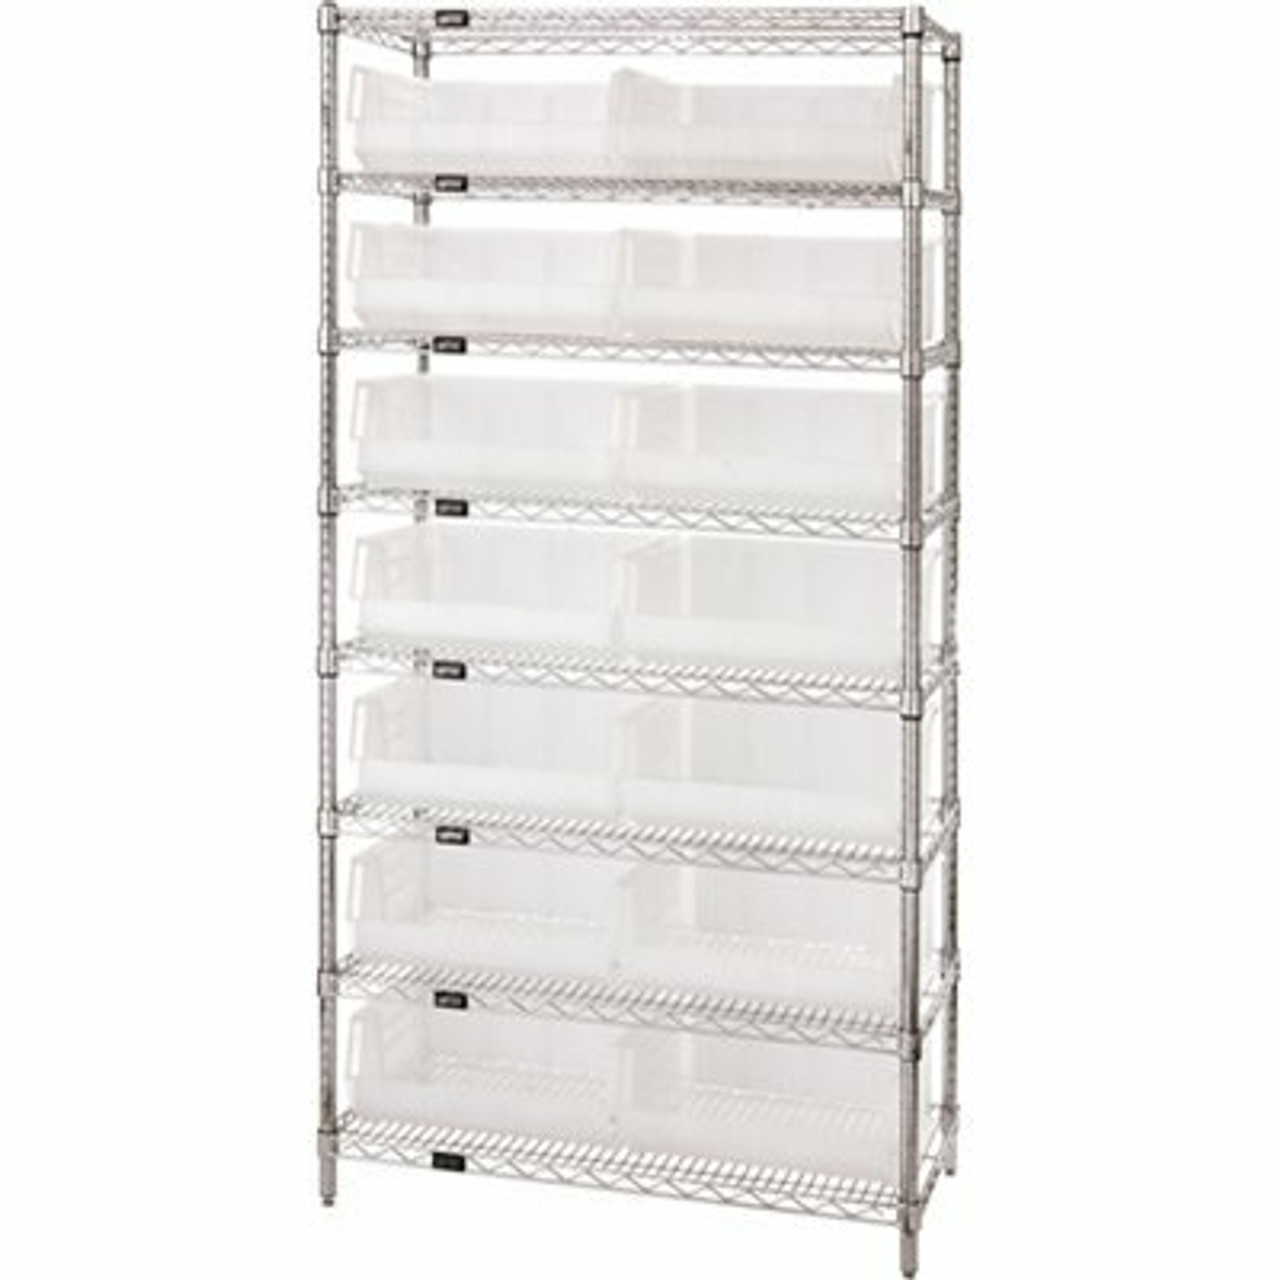 Quantum Storage Systems Giant Open Hopper 36 In. X 14 In. X 74 In. Wire Chrome Heavy Duty 8-Tier Industrial Shelving Unit - 308241552